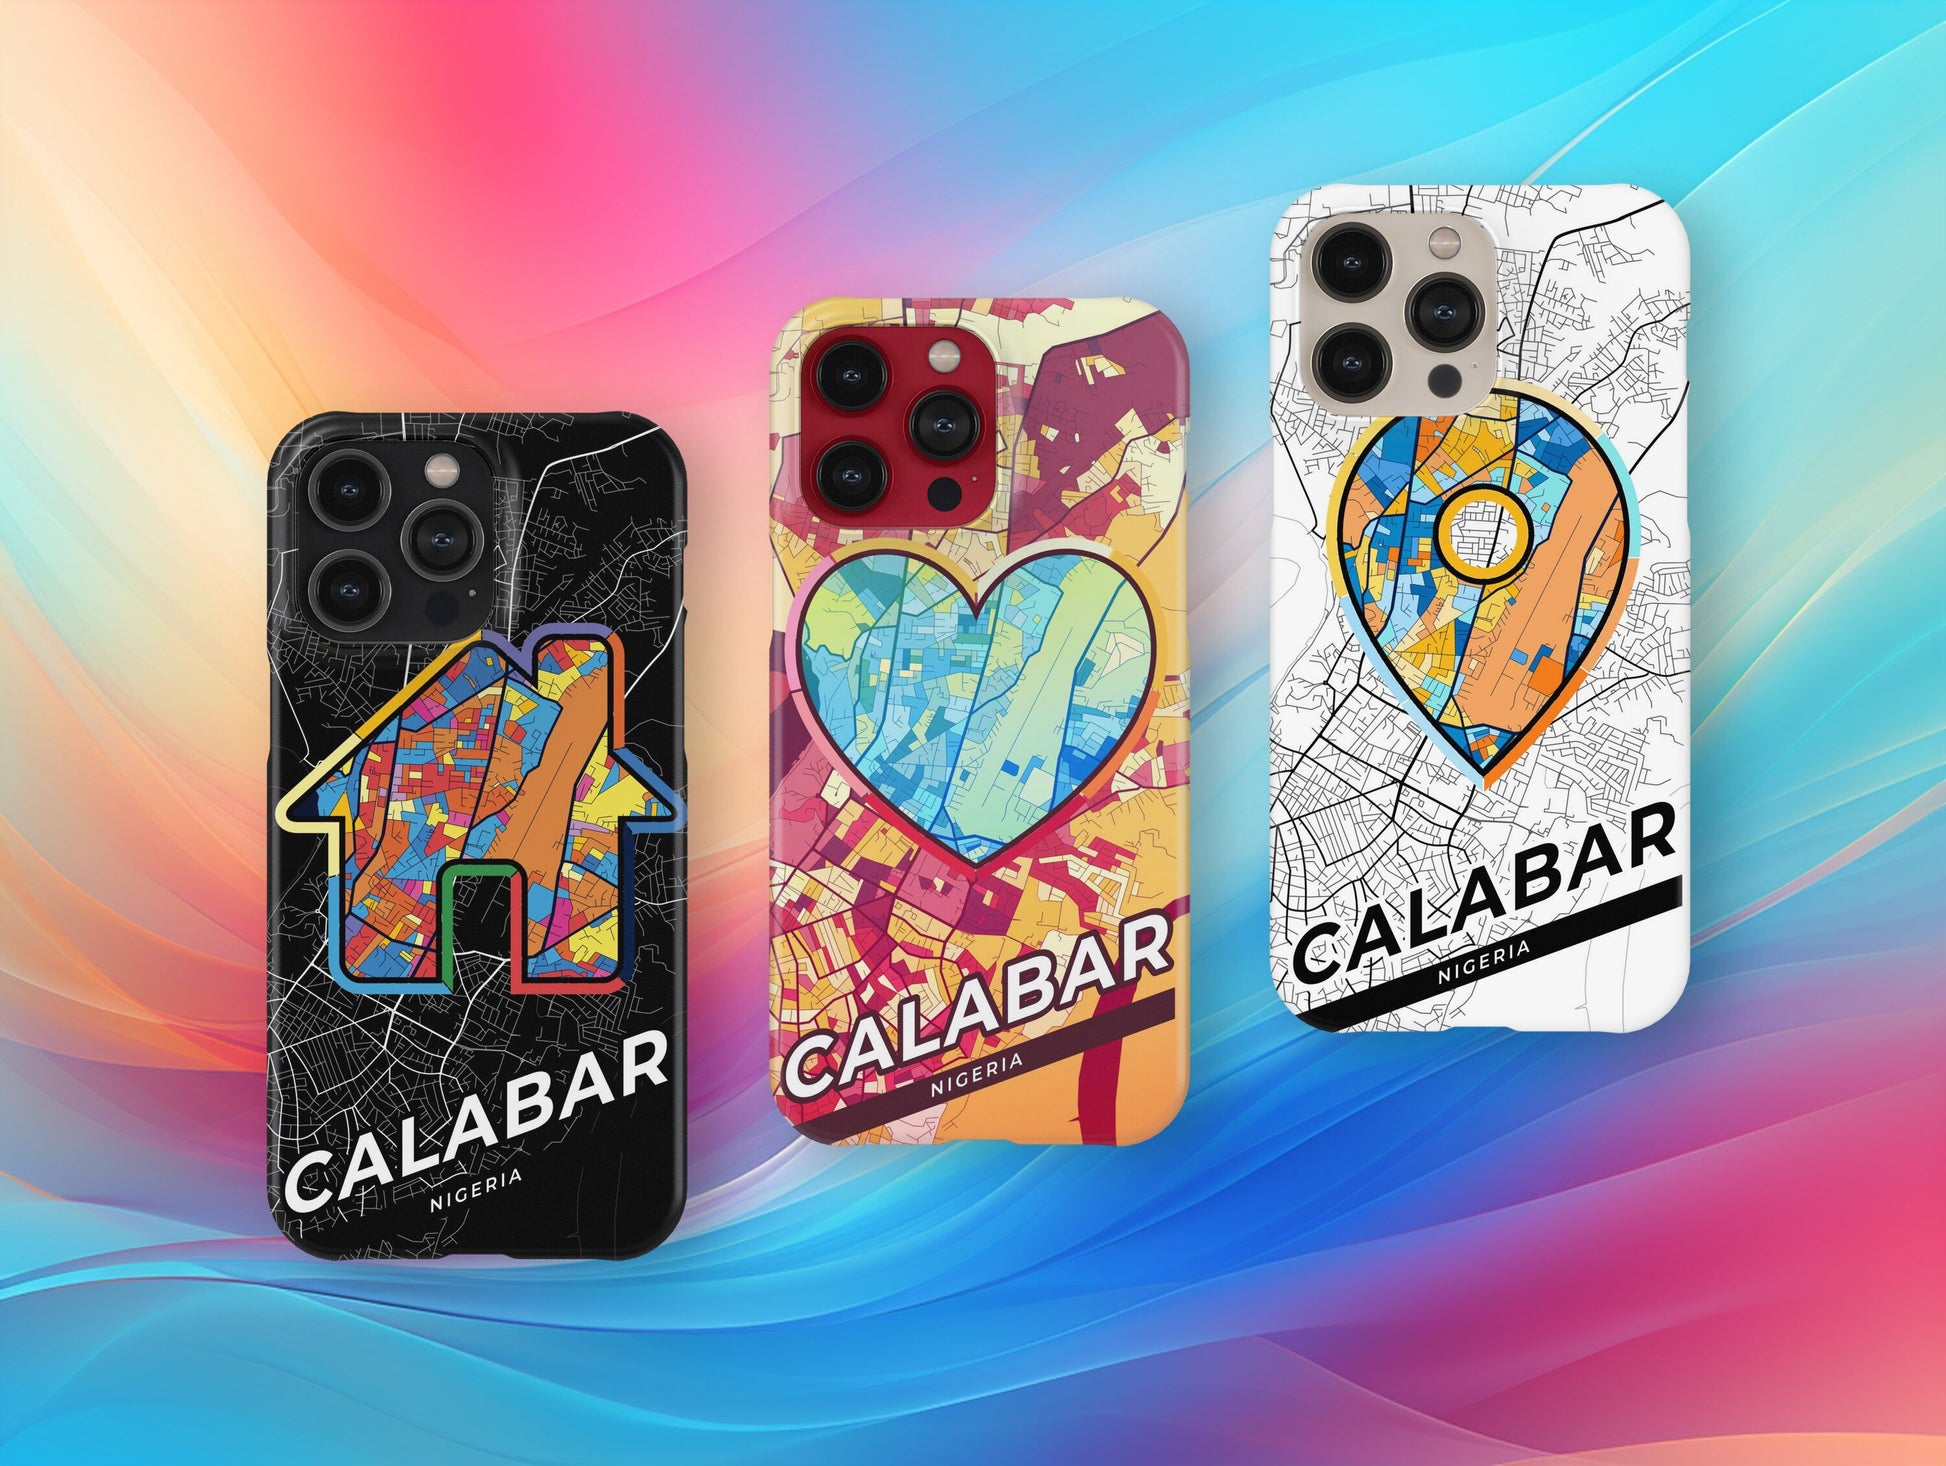 Calabar Nigeria slim phone case with colorful icon. Birthday, wedding or housewarming gift. Couple match cases.